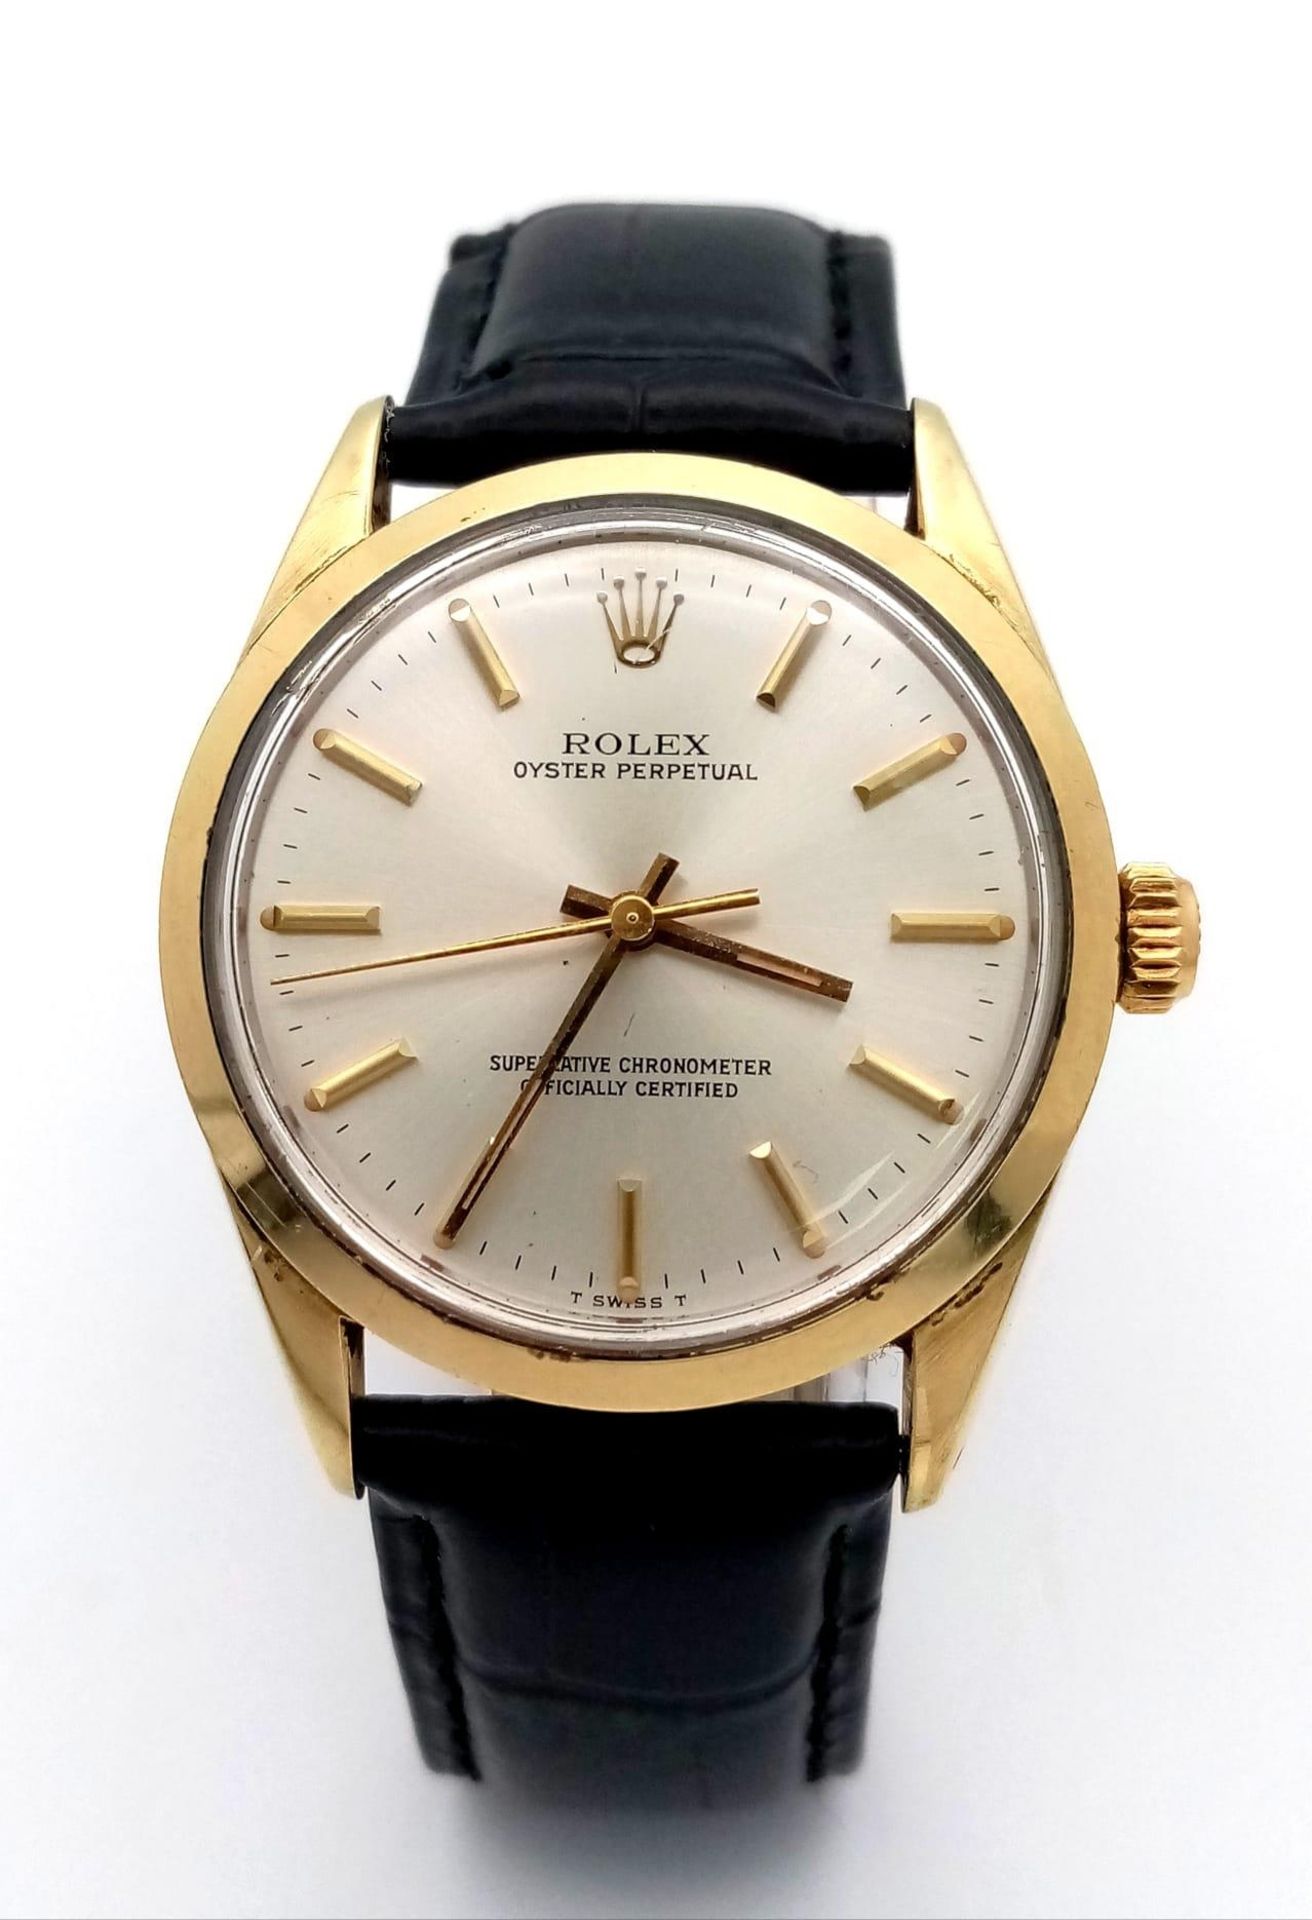 A VINTAGE ROLEX OYSTER PERPETUAL GENTS WATCH ON THE ORIGINAL ROLEX BLACK LEATHER STRAP ONLY WORN A